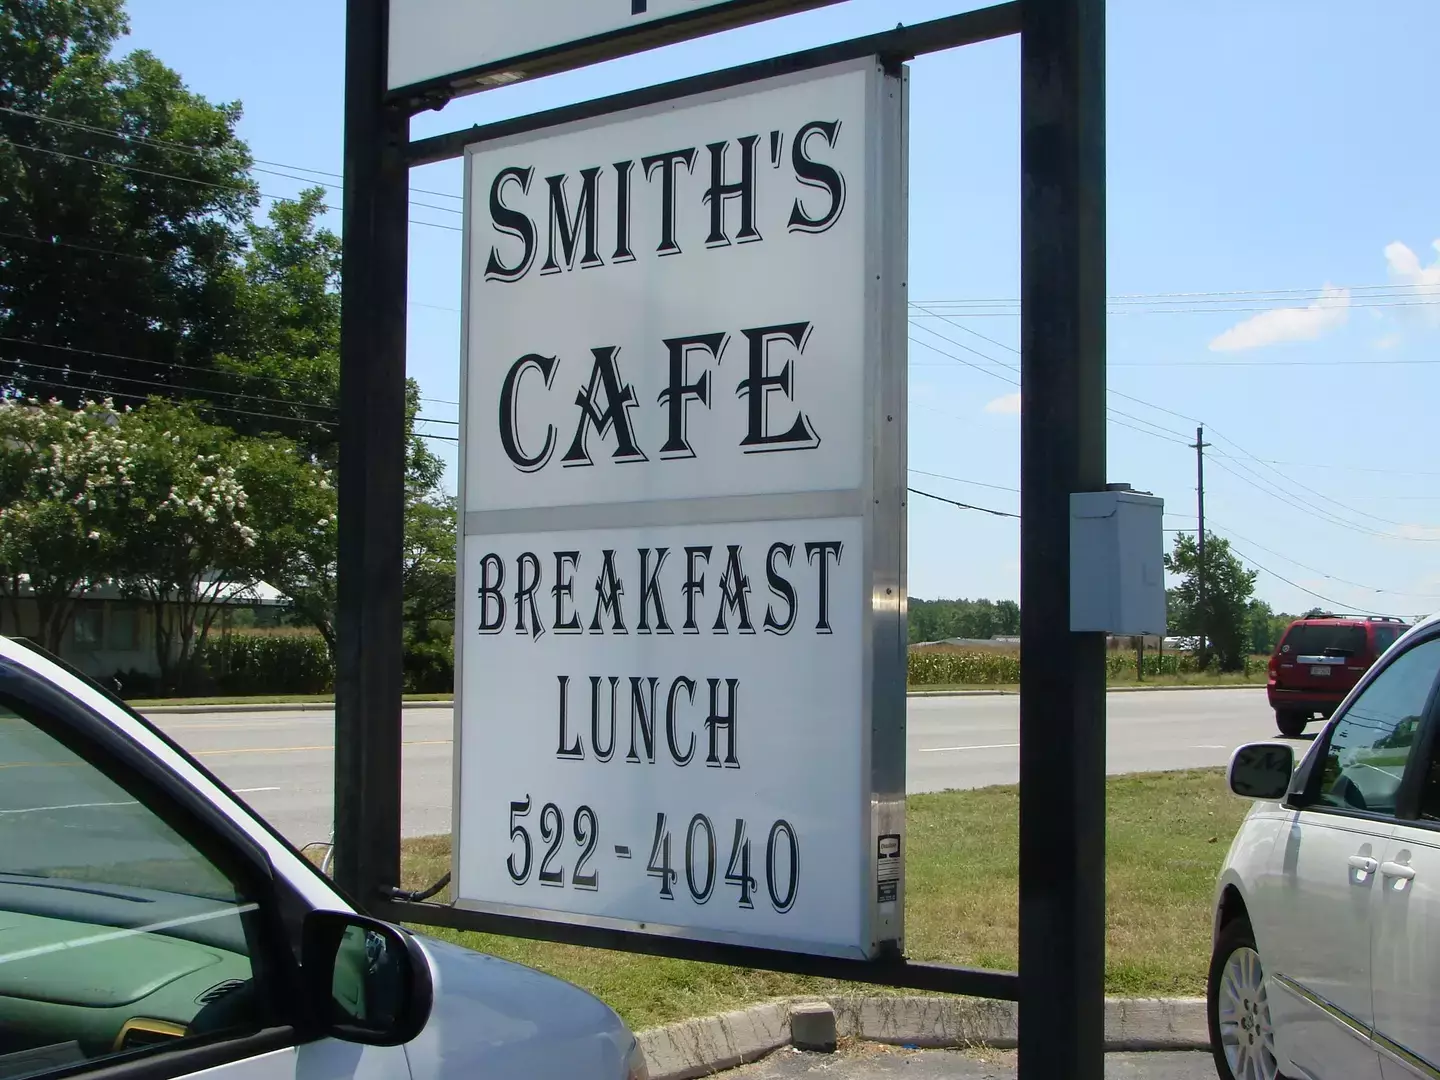 Smith's Cafe uploaded pictures of the front and back of their customers' card to Facebook. (Facebook/ Smith's Cafe)